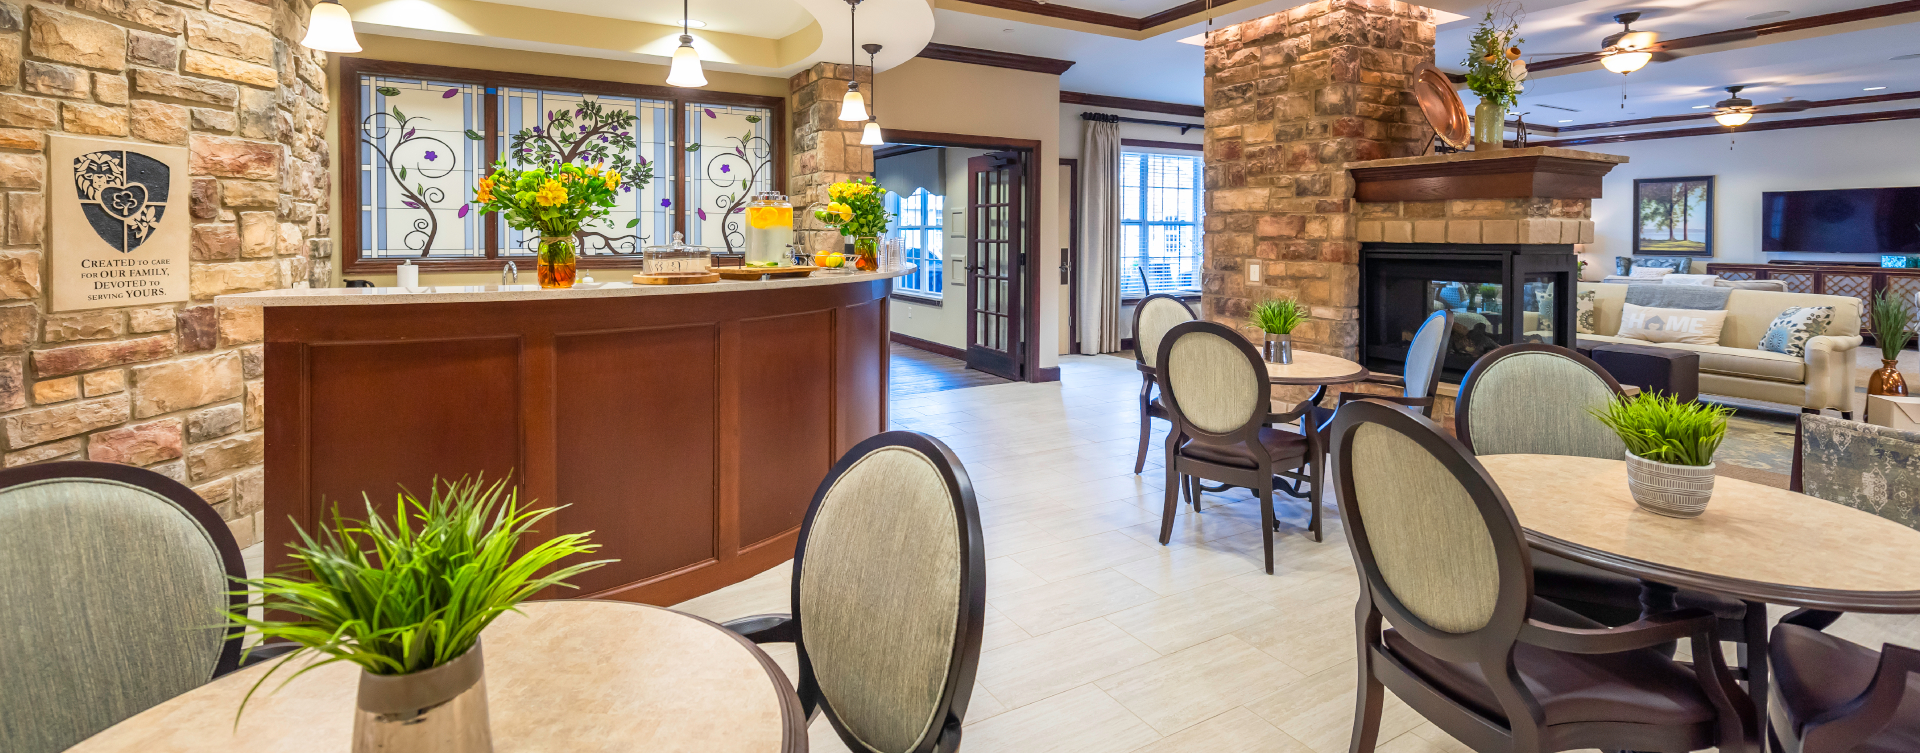 We’re serving up snacks, beverages and service around the clock in the bistro at Bickford of Shelby Township